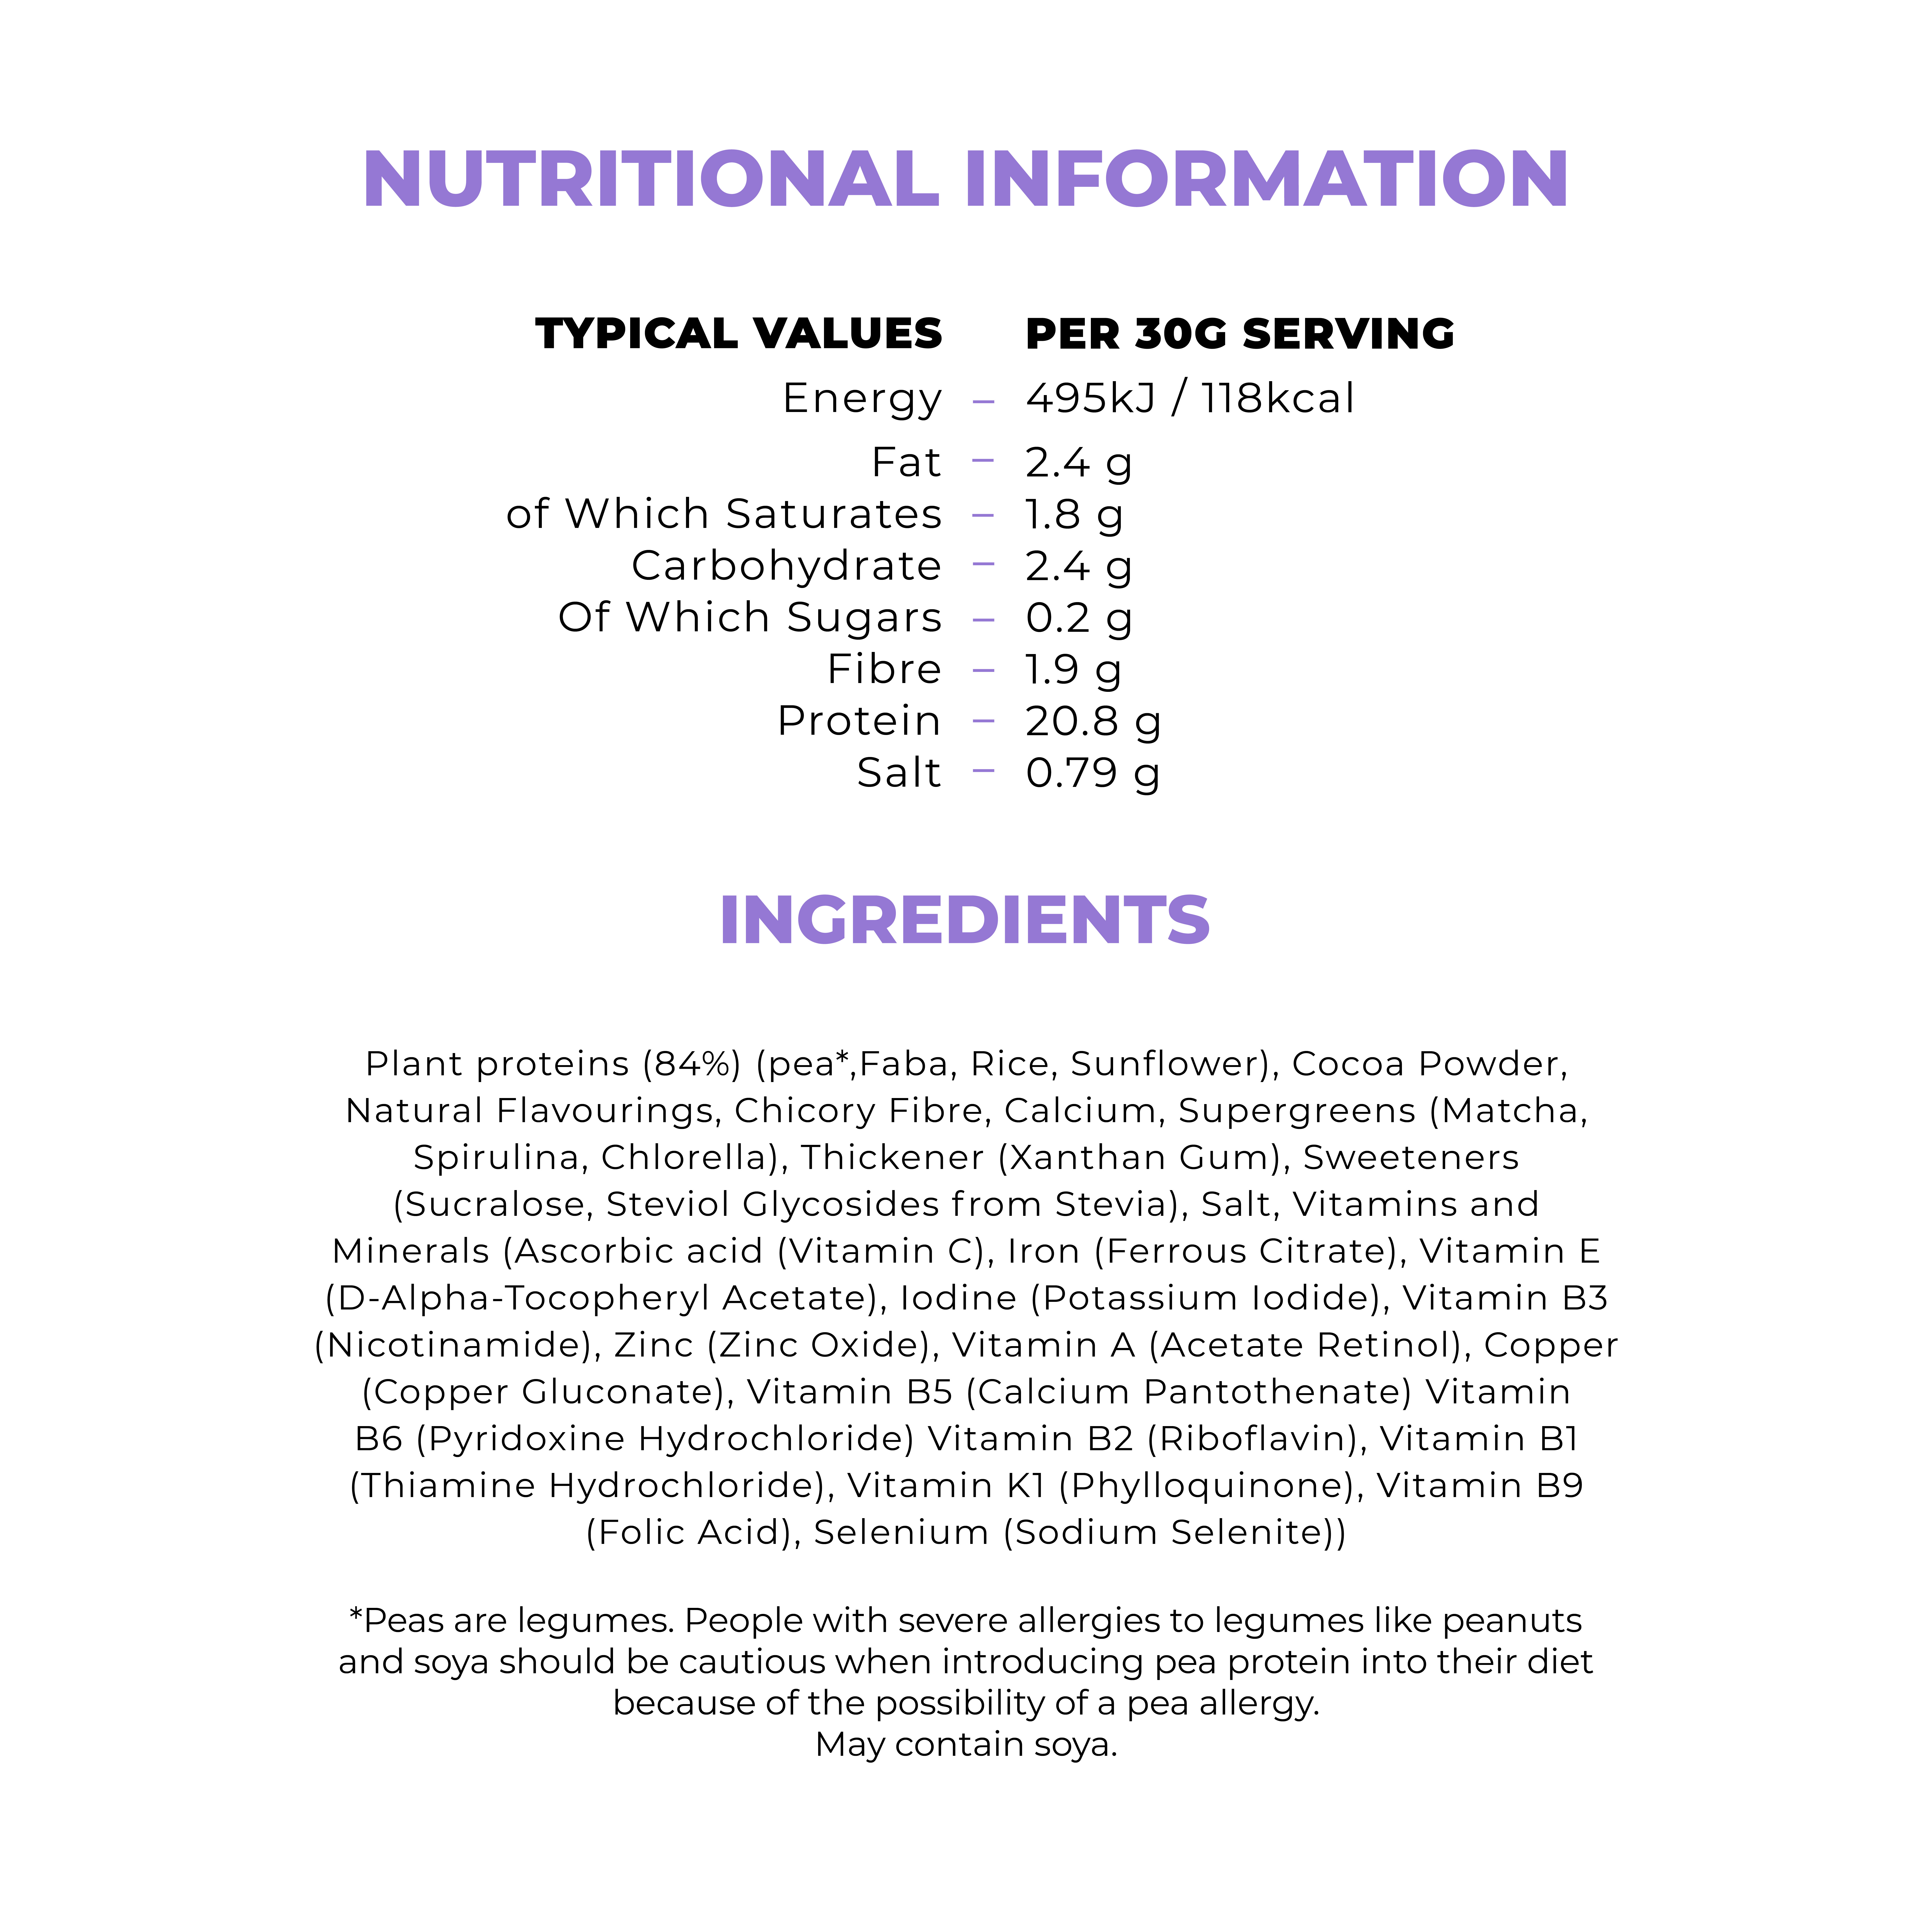 NUTRITIONAL INFORMATION TYPICAL VALUES Energy Fat of Which Saturates Carbohydrate Of Which Sugars Fibre PER 30G SERVING 495kJ / 118kcal 2.4 g Protein - 20.8 g Salt 0.79 g INGREDIENTS Plant proteins (84%) (pea,Faba, Rice, Sunflower), Cocoa Powder, Natural Flavourings, Chicory Fibre, Calcium, Supergreens (Matcha, Spirulina, Chlorella), Thickener (Xanthan Gum), Sweeteners 
                                  (Sucralose, Steviol Glycosides from Stevia), Salt, Vitamins and Minerals (Ascorbic acid (Vitamin C), Iron (Ferrous Citrate), Vitamin E
                                  (D-Alpha-Tocopheryl Acetate), lodine (Potassium lodide), Vitamin B3 (Nicotinamide), Zinc (Zinc Oxide), Vitamin A (Acetate Retinol), Copper (Copper Gluconate), Vitamin B5 (Calcium Pantothenate) Vitamin B6 (Pyridoxine Hydrochloride) Vitamin B2 (Riboflavin), Vitamin B1 (Thiamine Hydrochloride), Vitamin K1 (Phylloquinone), Vitamin B9 (Folic Acid), Selenium (Sodium Selenite)) Peas are legumes. People with severe allergies to legumes like peanuts and soya should be cautious when introducing pea protein into their diet because of the possibility of a pea allergy. May contain soya.